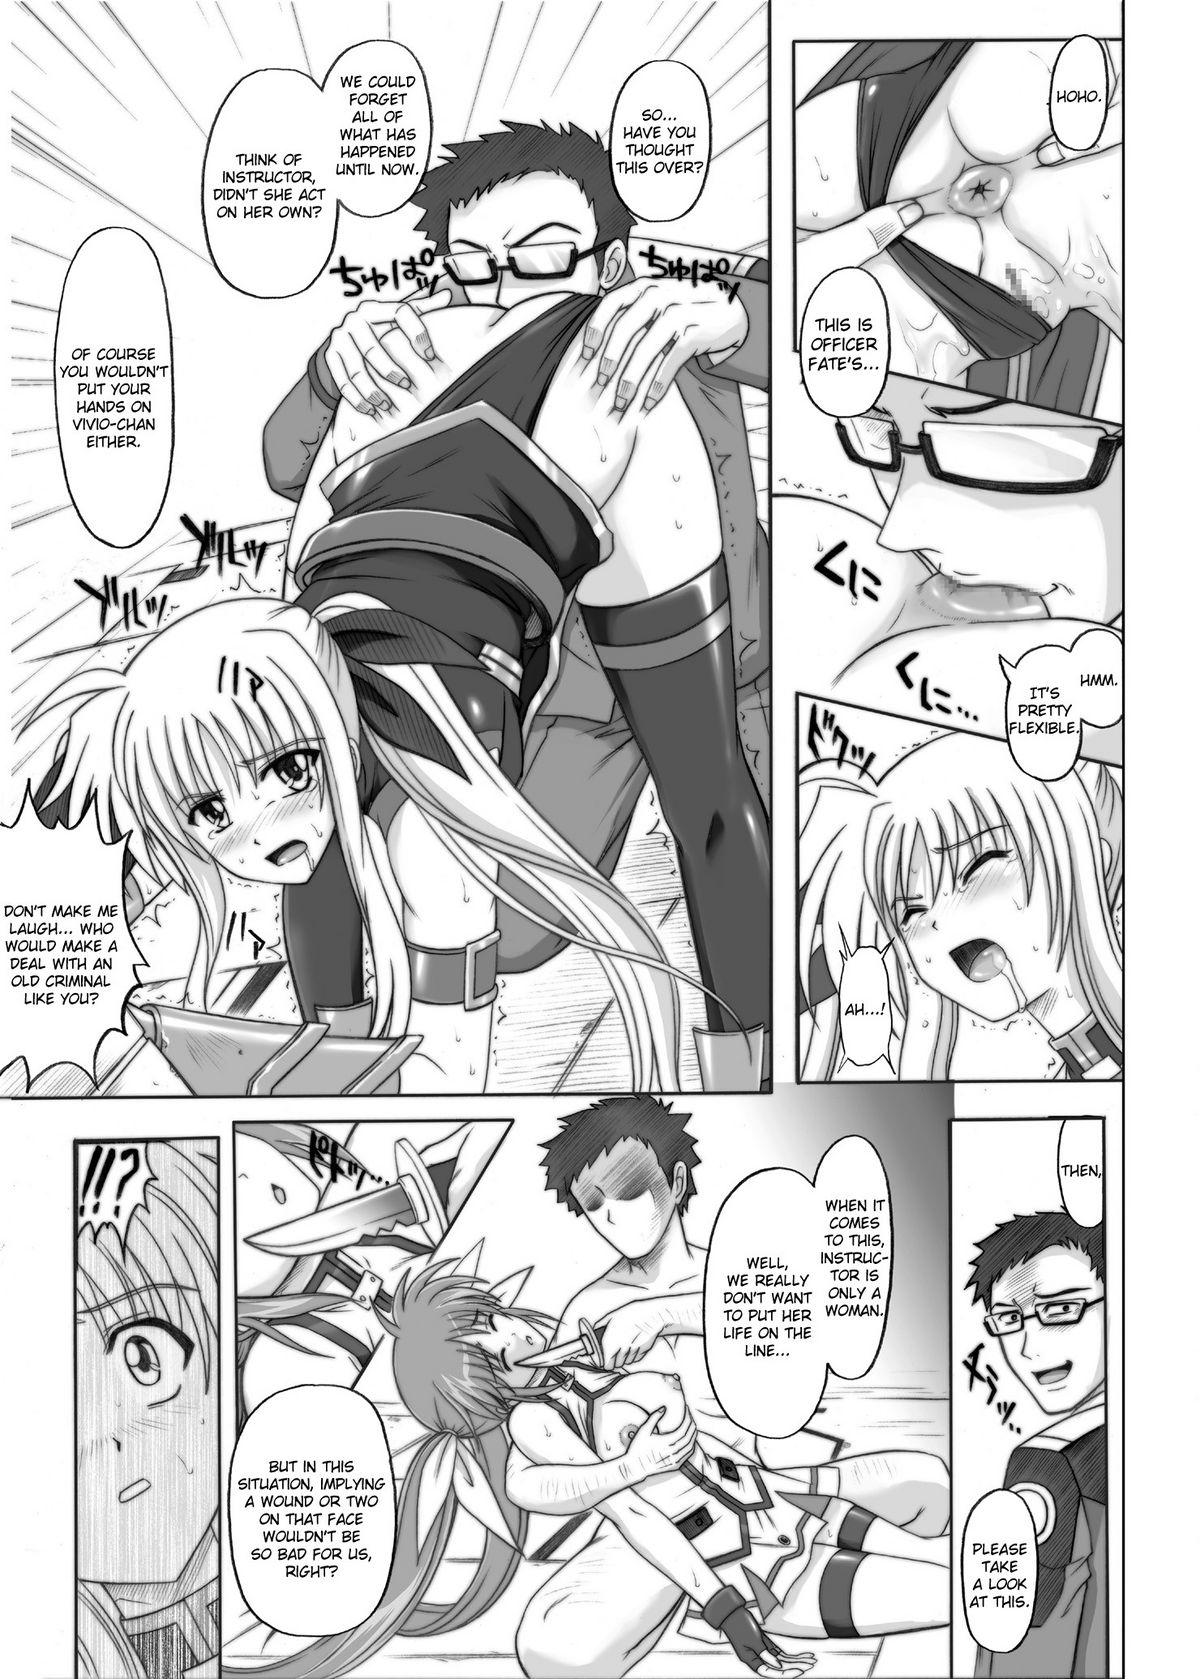 Bangbros 840 BAD END - Color Classic Situation Note Extention 1.5 - Mahou shoujo lyrical nanoha Gaycum - Page 6